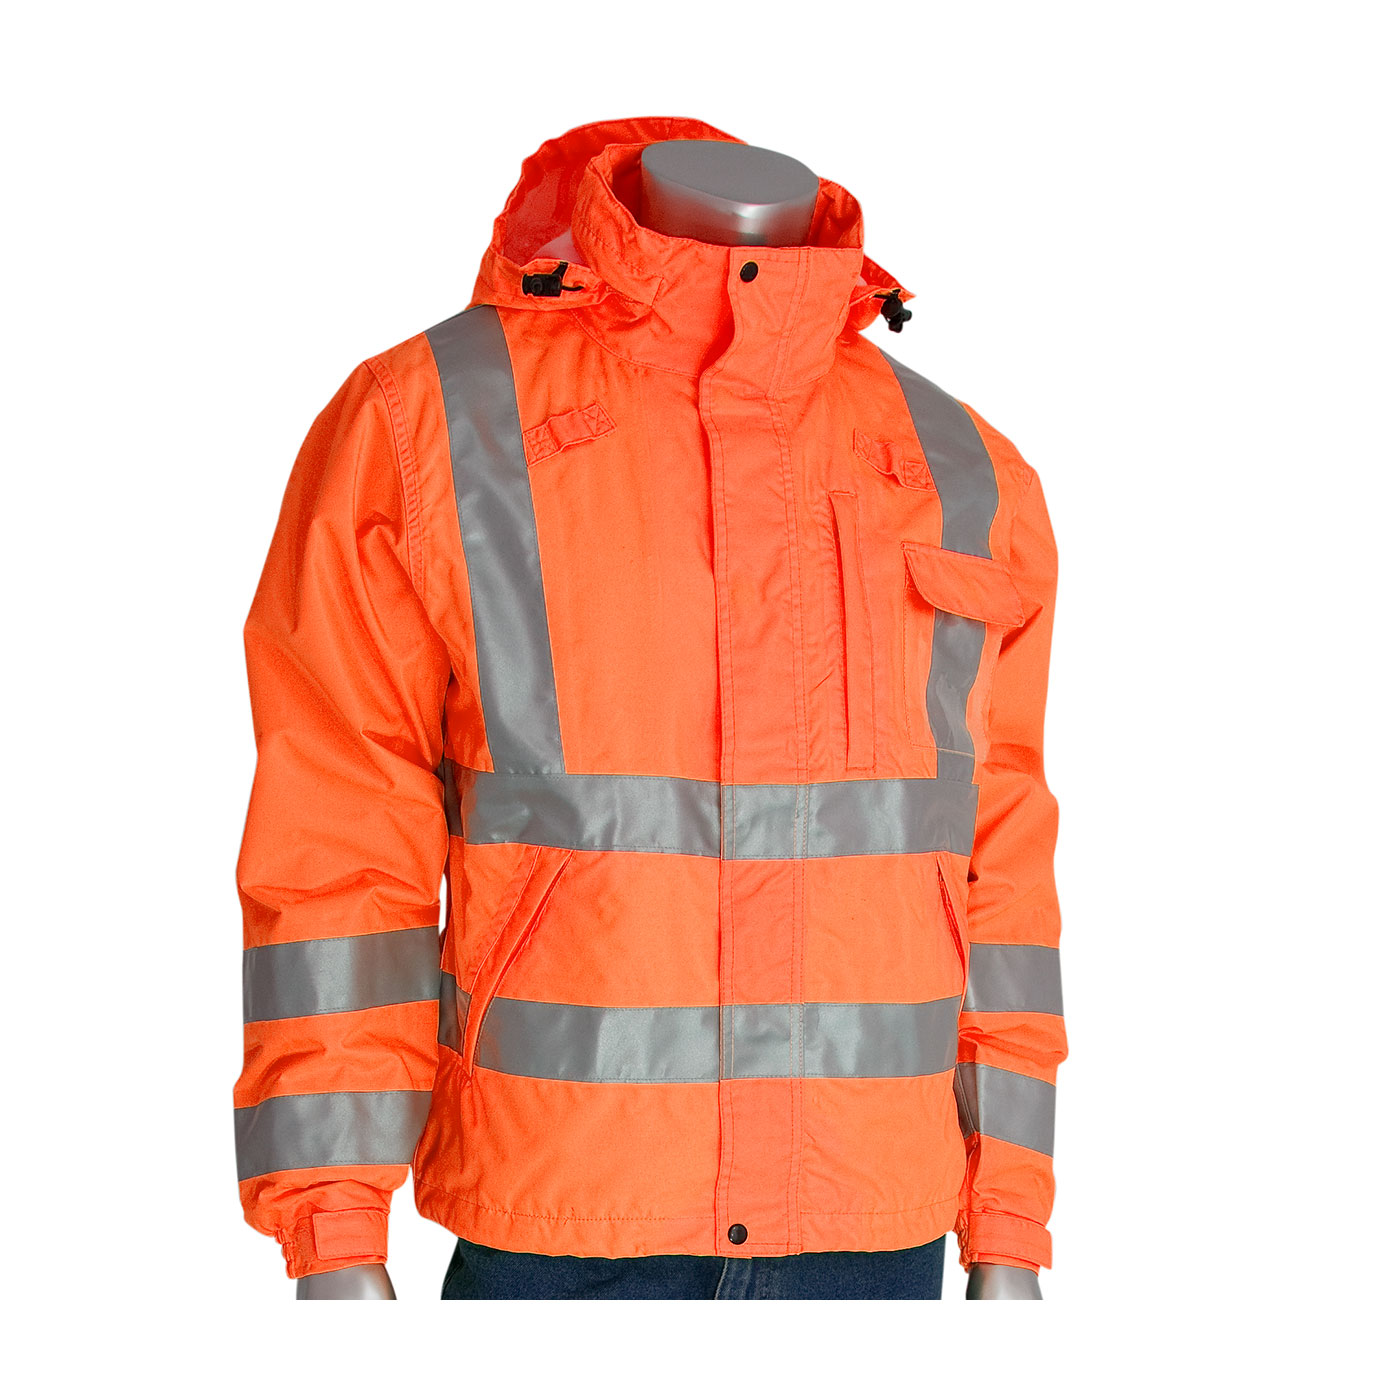 PIP VizPLUS Type R Class 3 Heavy Duty Waterproof Breathable Jacket from GME Supply